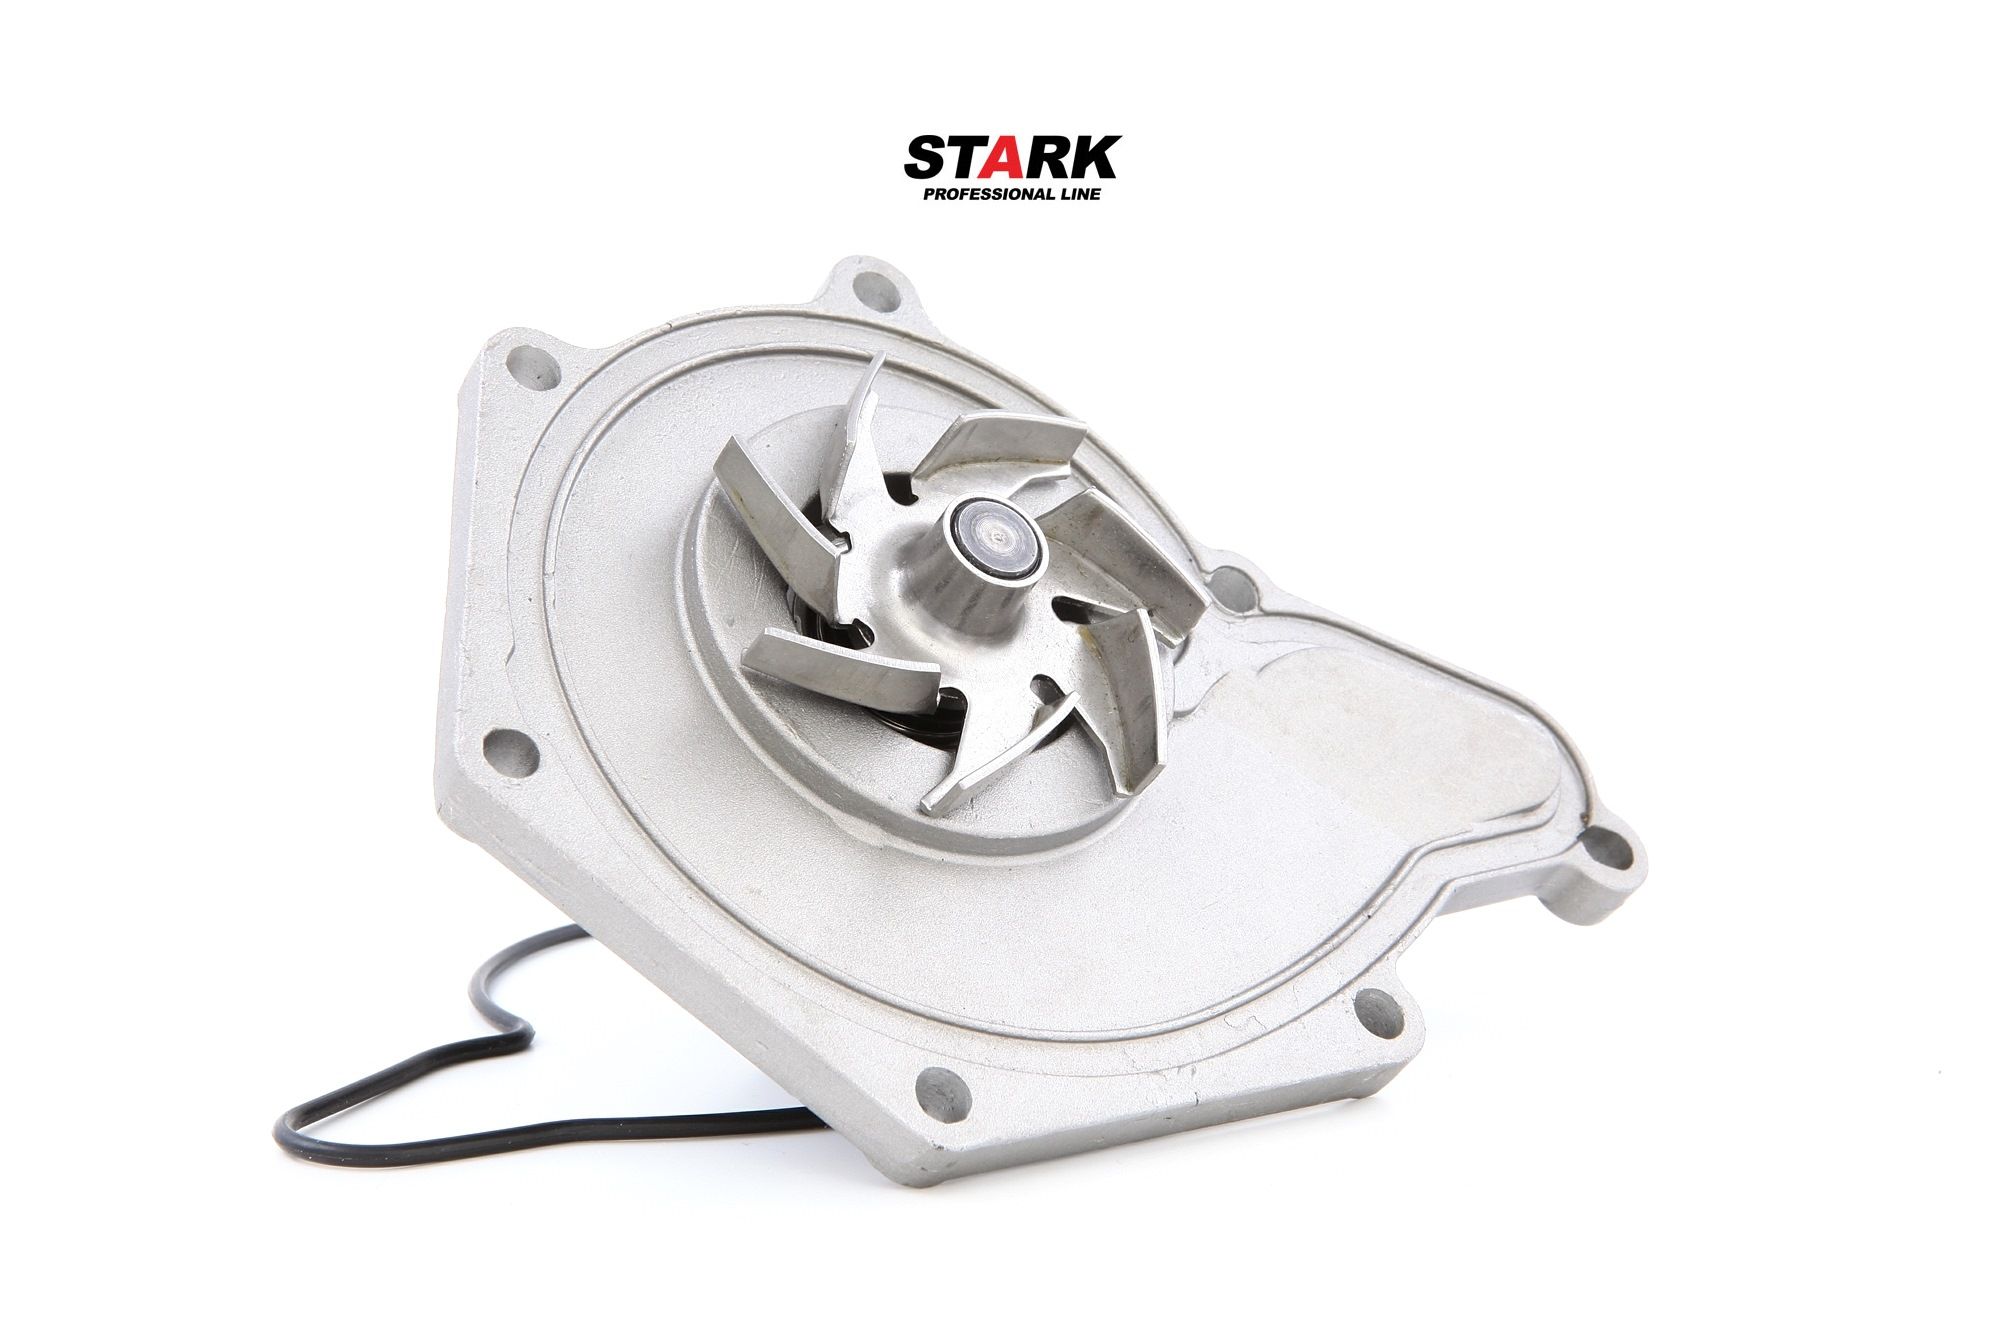 STARK Cast Aluminium, without belt pulley, with seal, Mechanical, Metal Water pumps SKWP-0520055 buy